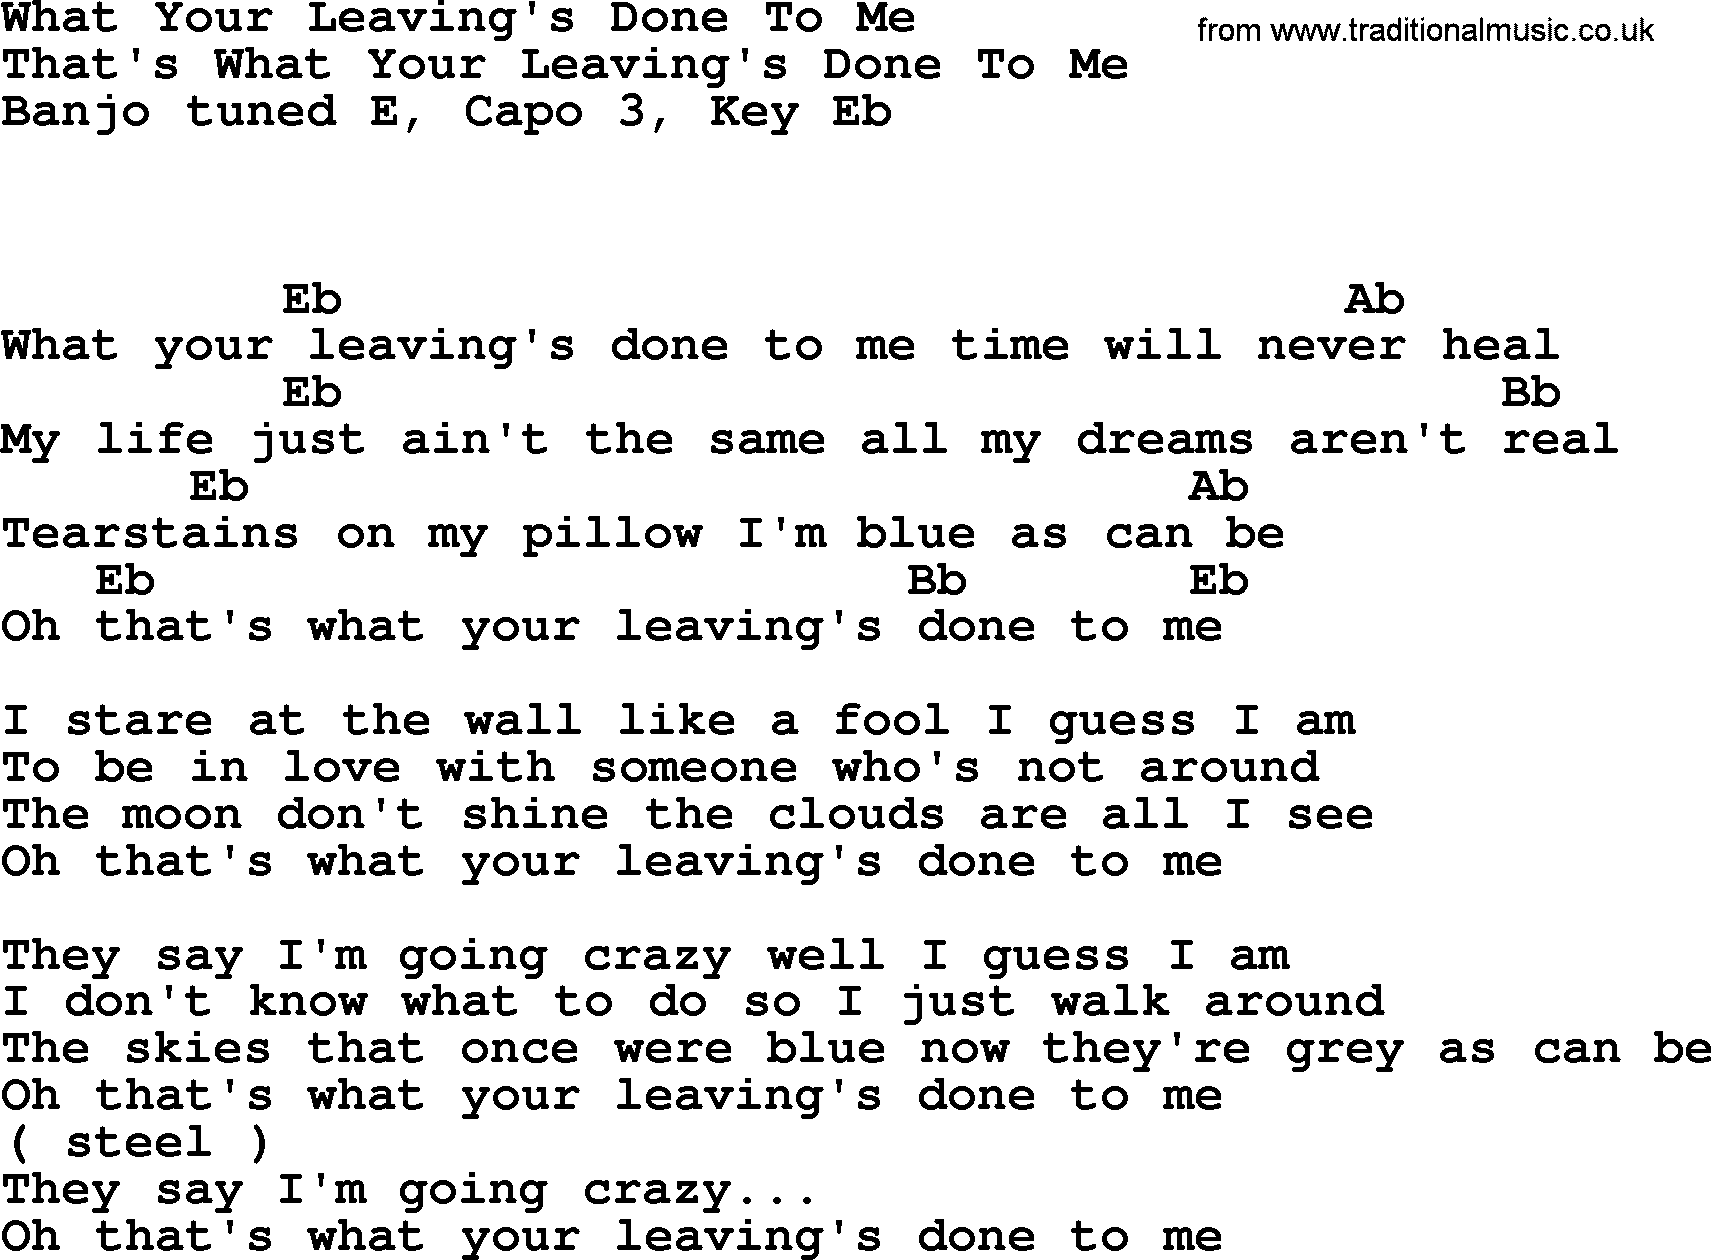 Bluegrass song: What Your Leaving's Done To Me, lyrics and chords